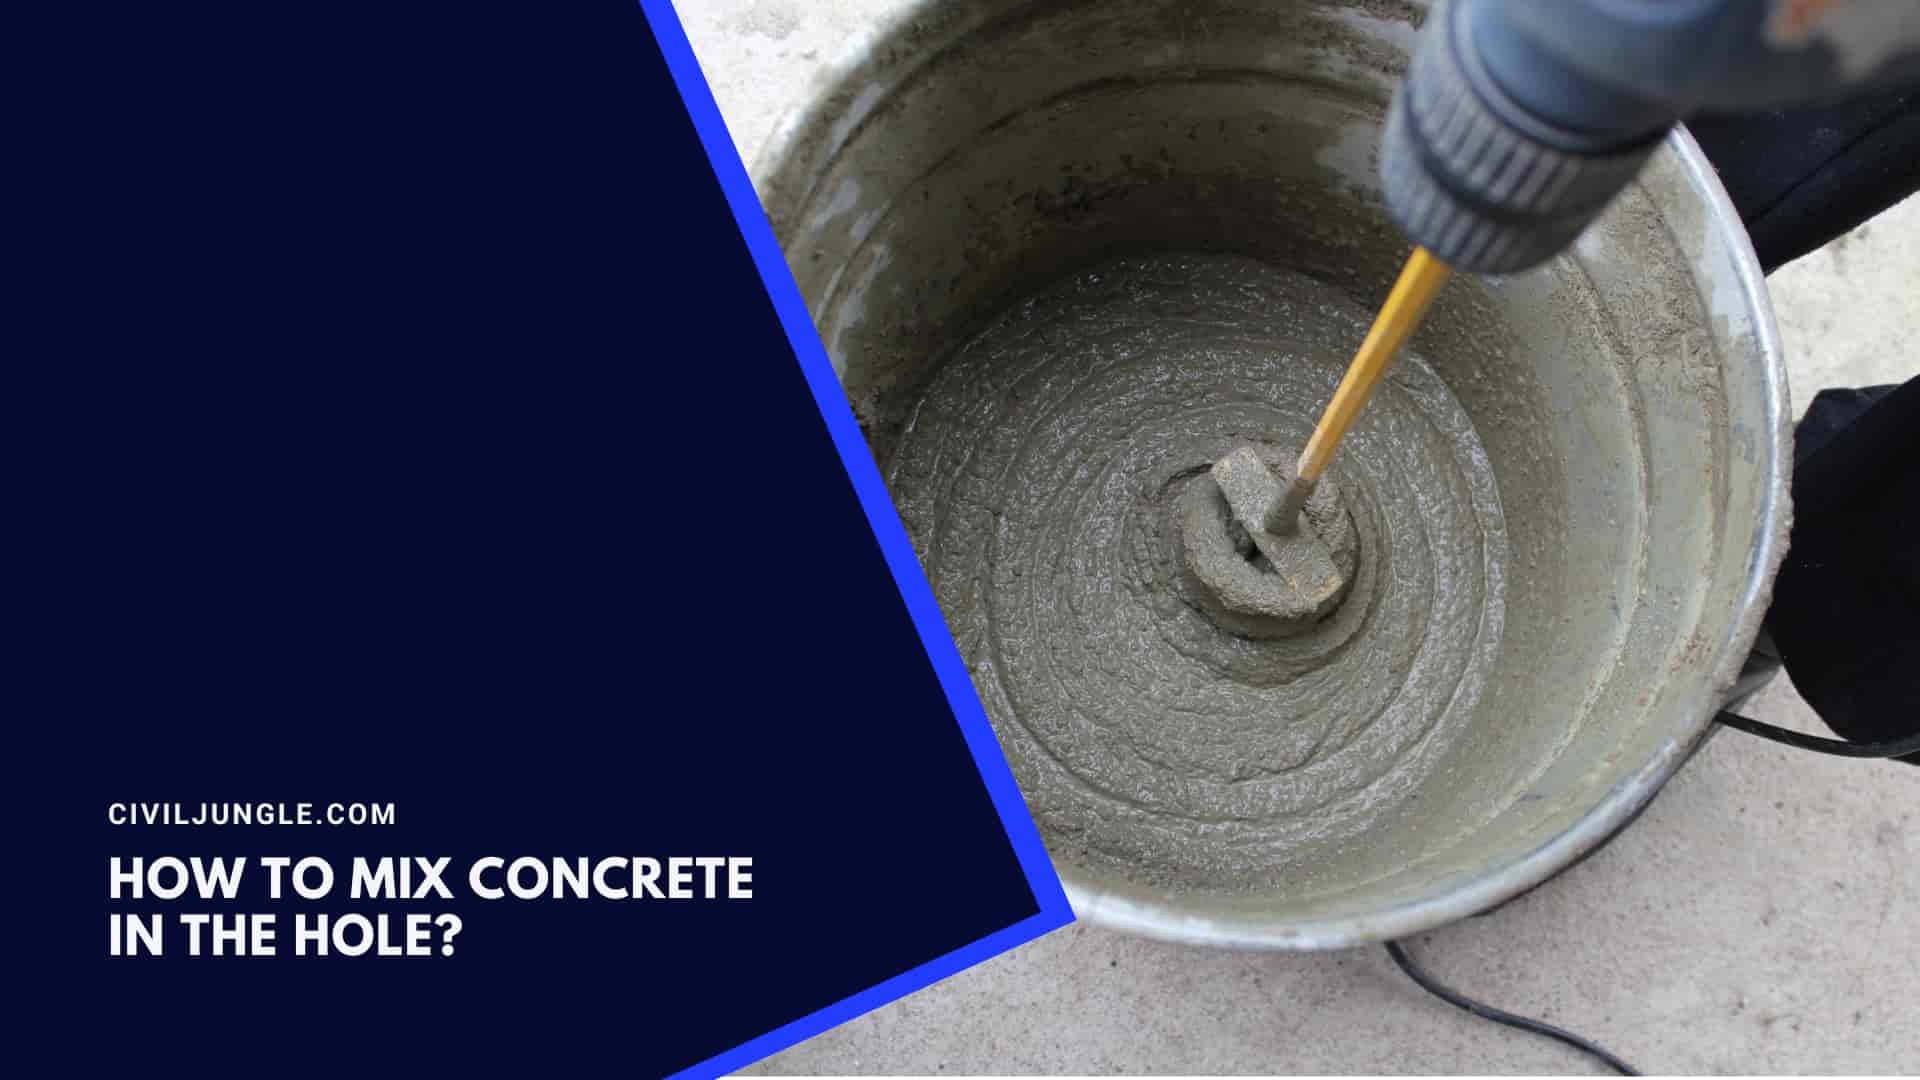 How To Mix Concrete In The Hole?